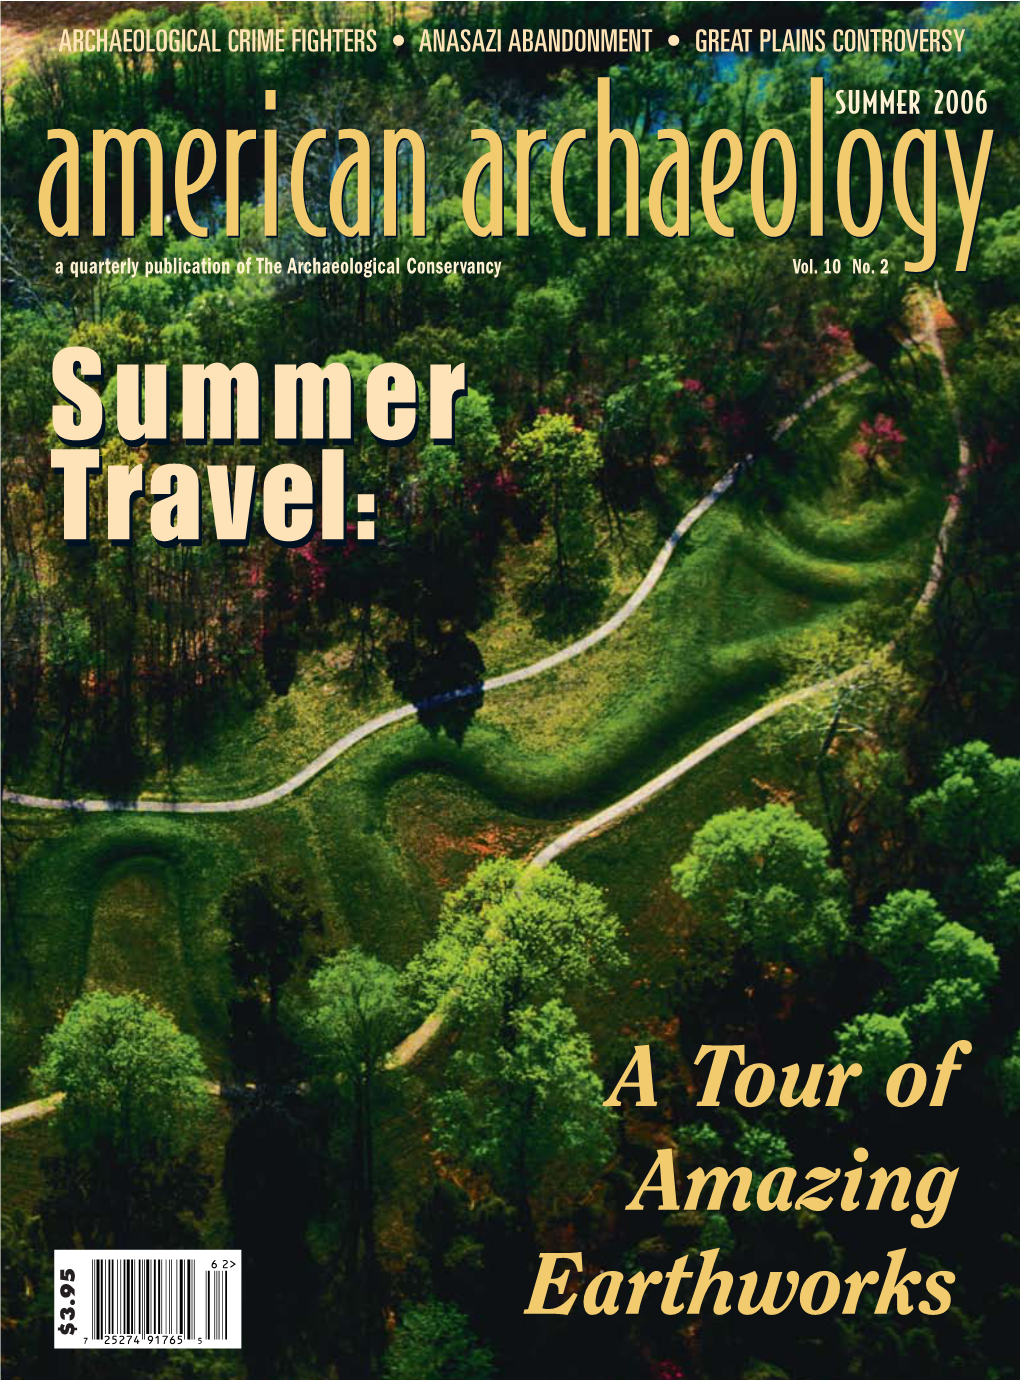 A Tour of Amazing Earthworks $3.95